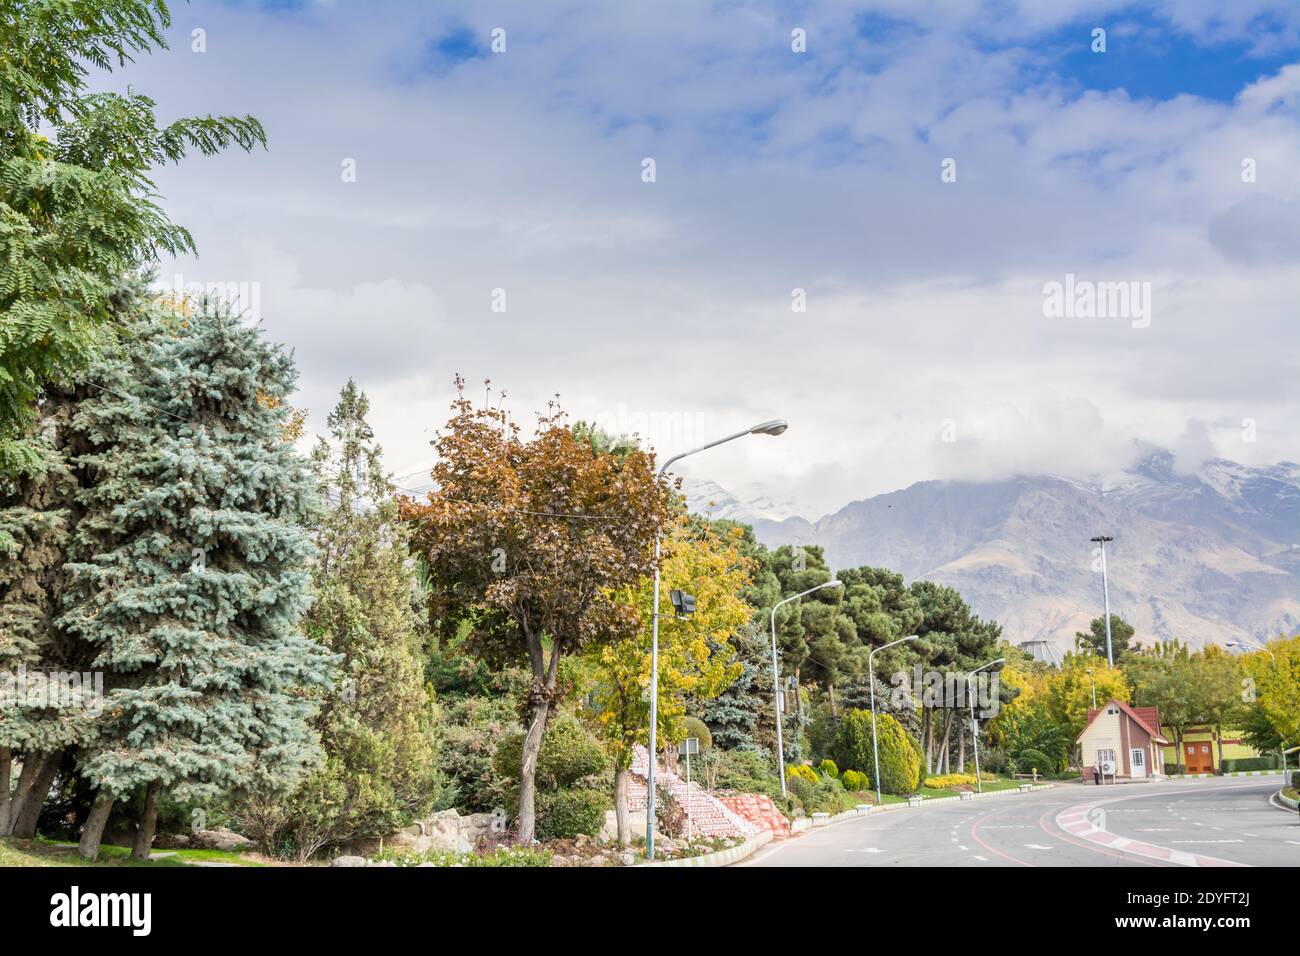 Winter Tehran street view in Tehran International Exhibition Center with snow covered Alborz Mountains against cloudy sky on background Stock Photo